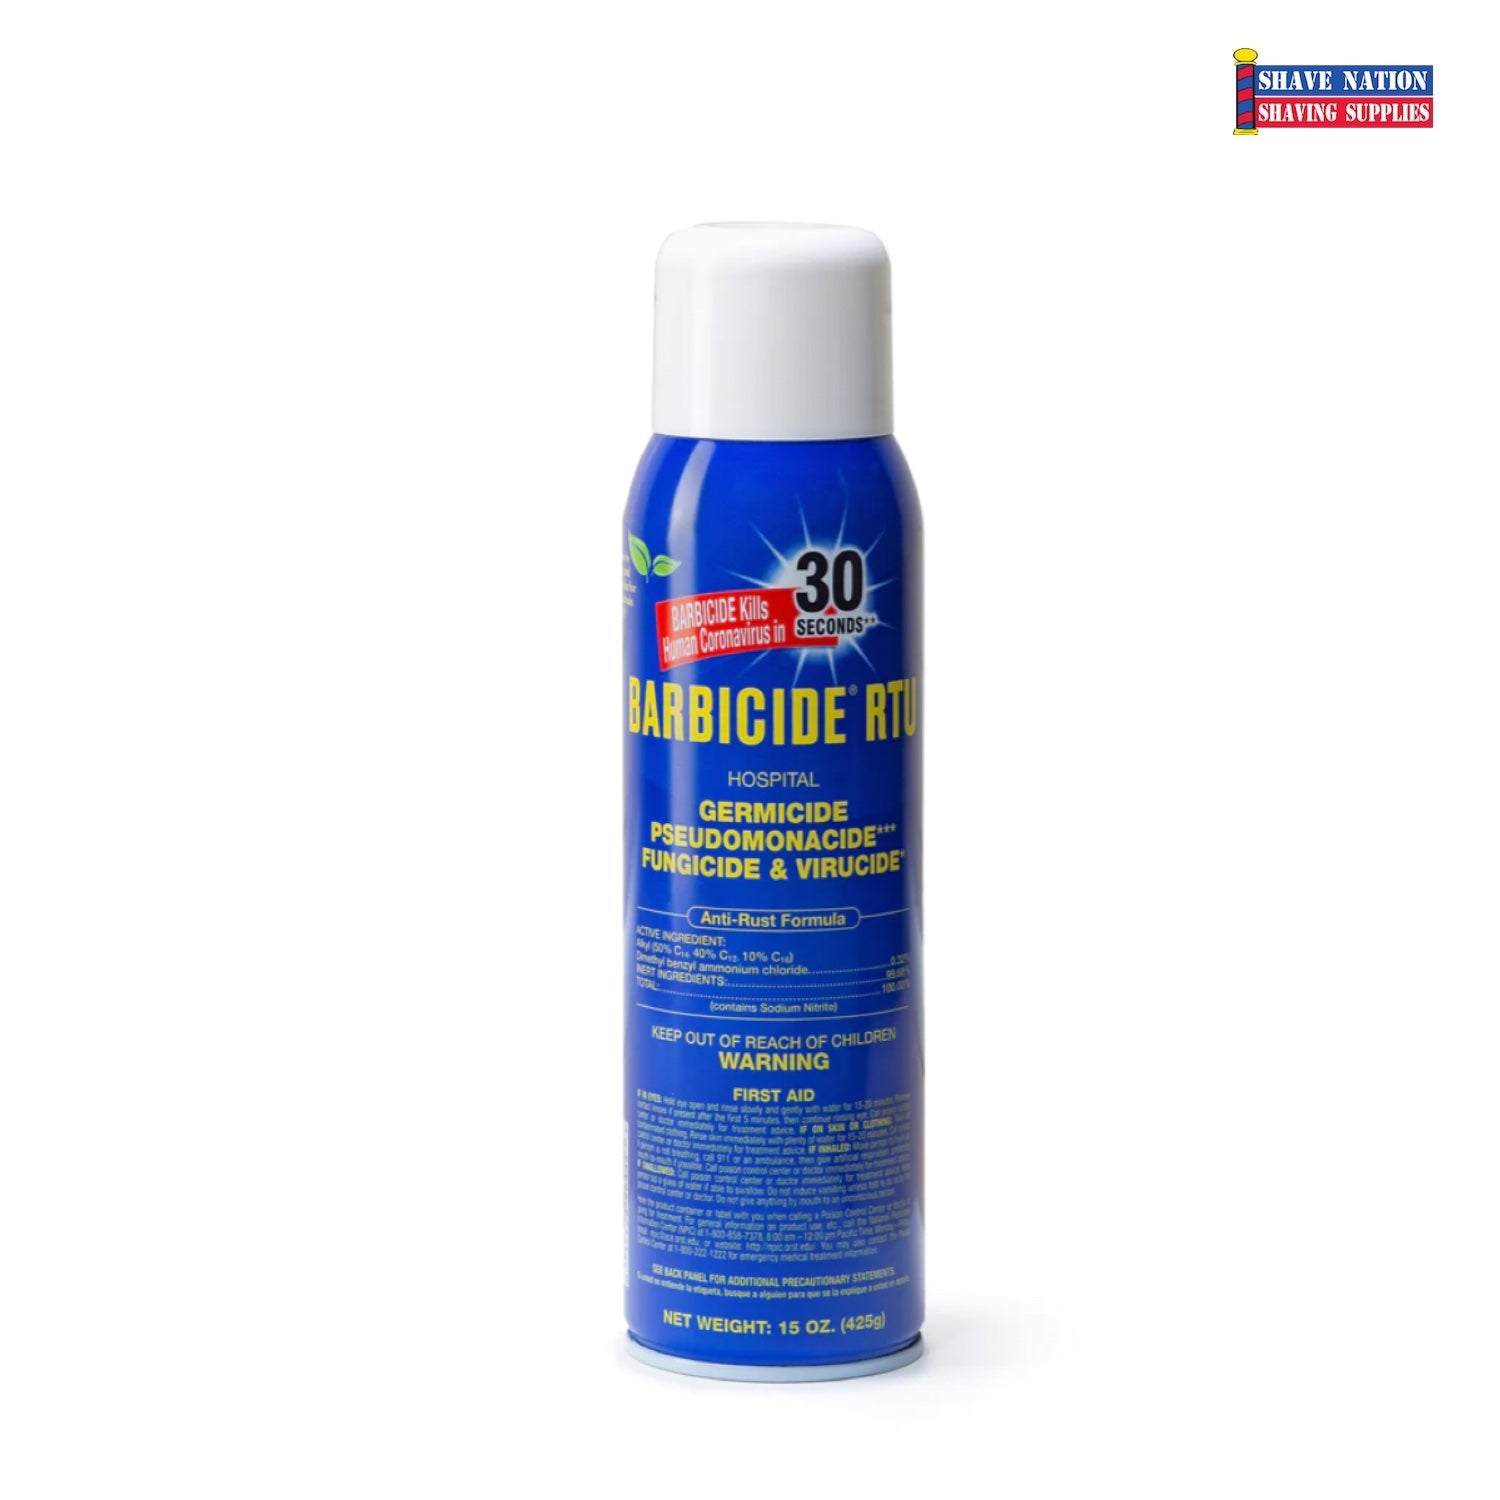 Barbicide Ready to Use Disinfectant Spray 15 fl oz